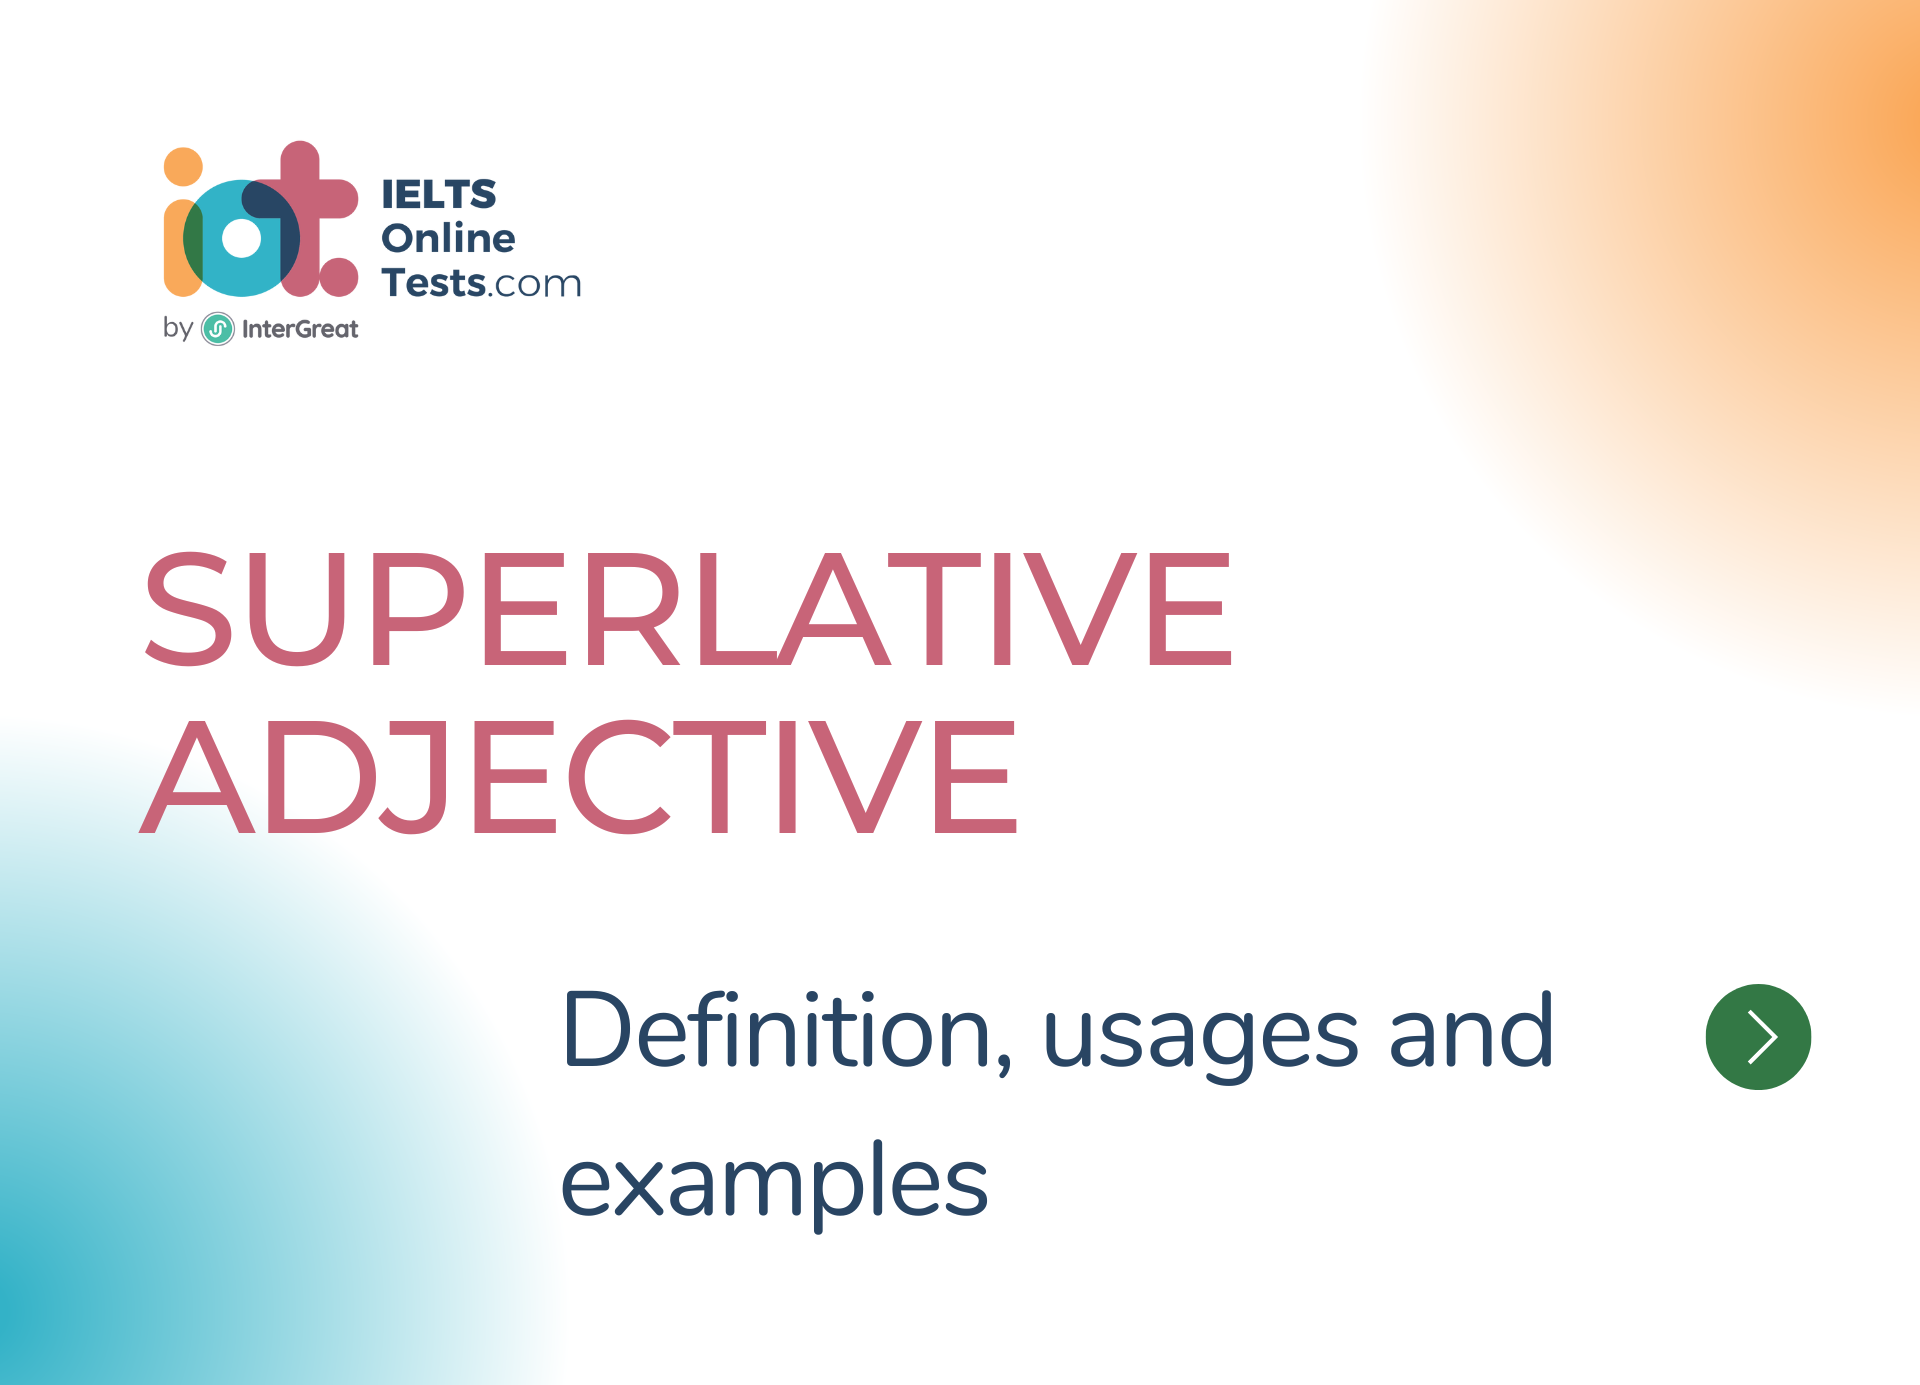 Superlative adjective definition, usages and examples